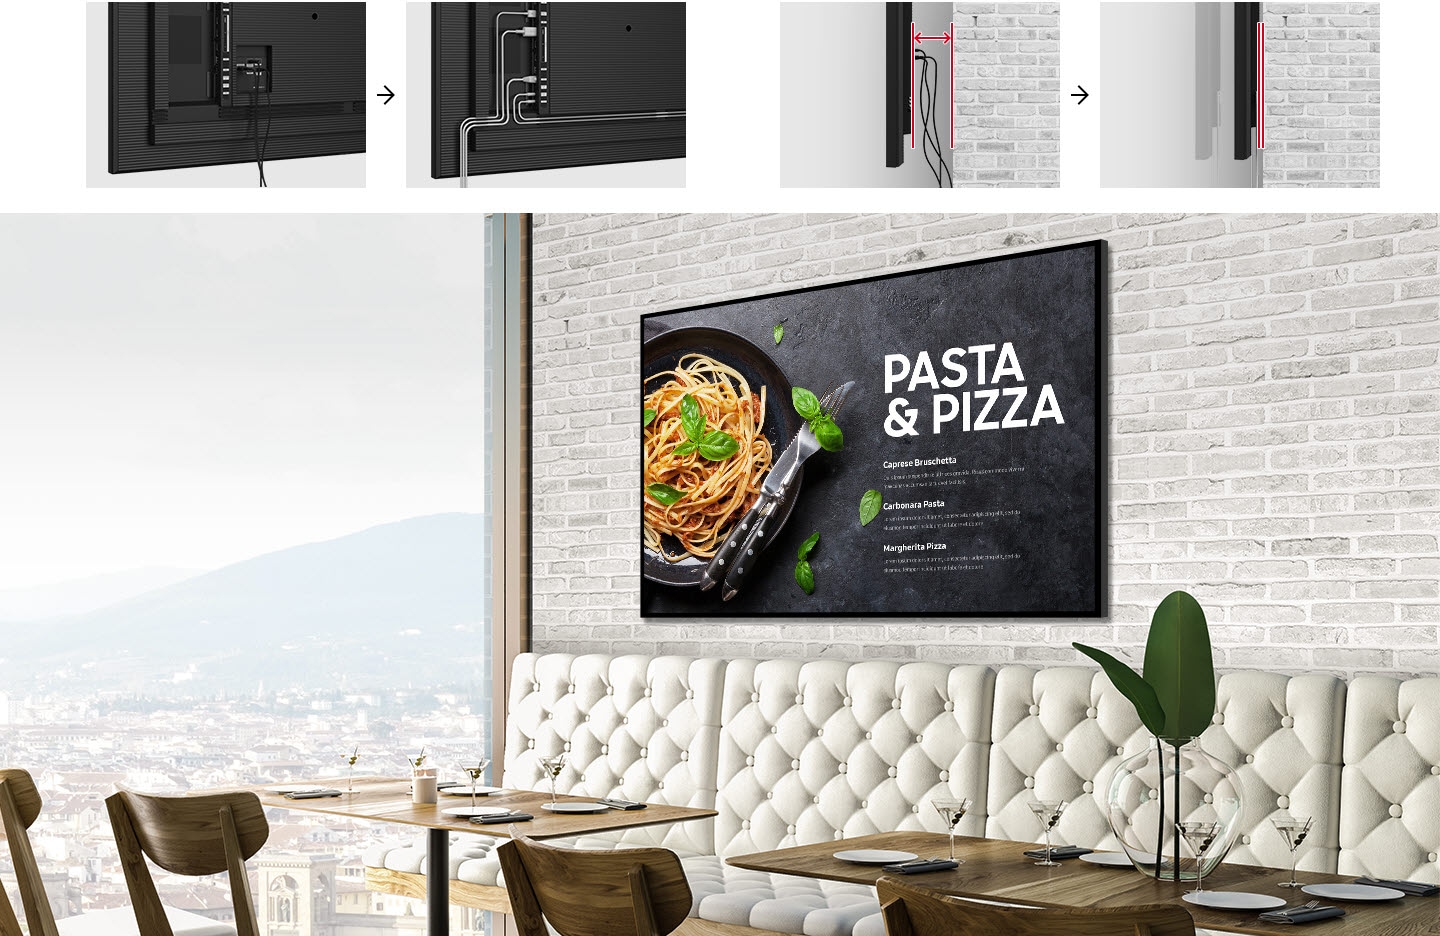 Compared to existing products, the QMB product has a cleaner rear line arrangement and a reduced installation distance from the wall. In QMB, the product and the wall are closely attached, and the cables are not exposed. The menu board is displayed on QMB on the wall of a restaurant.